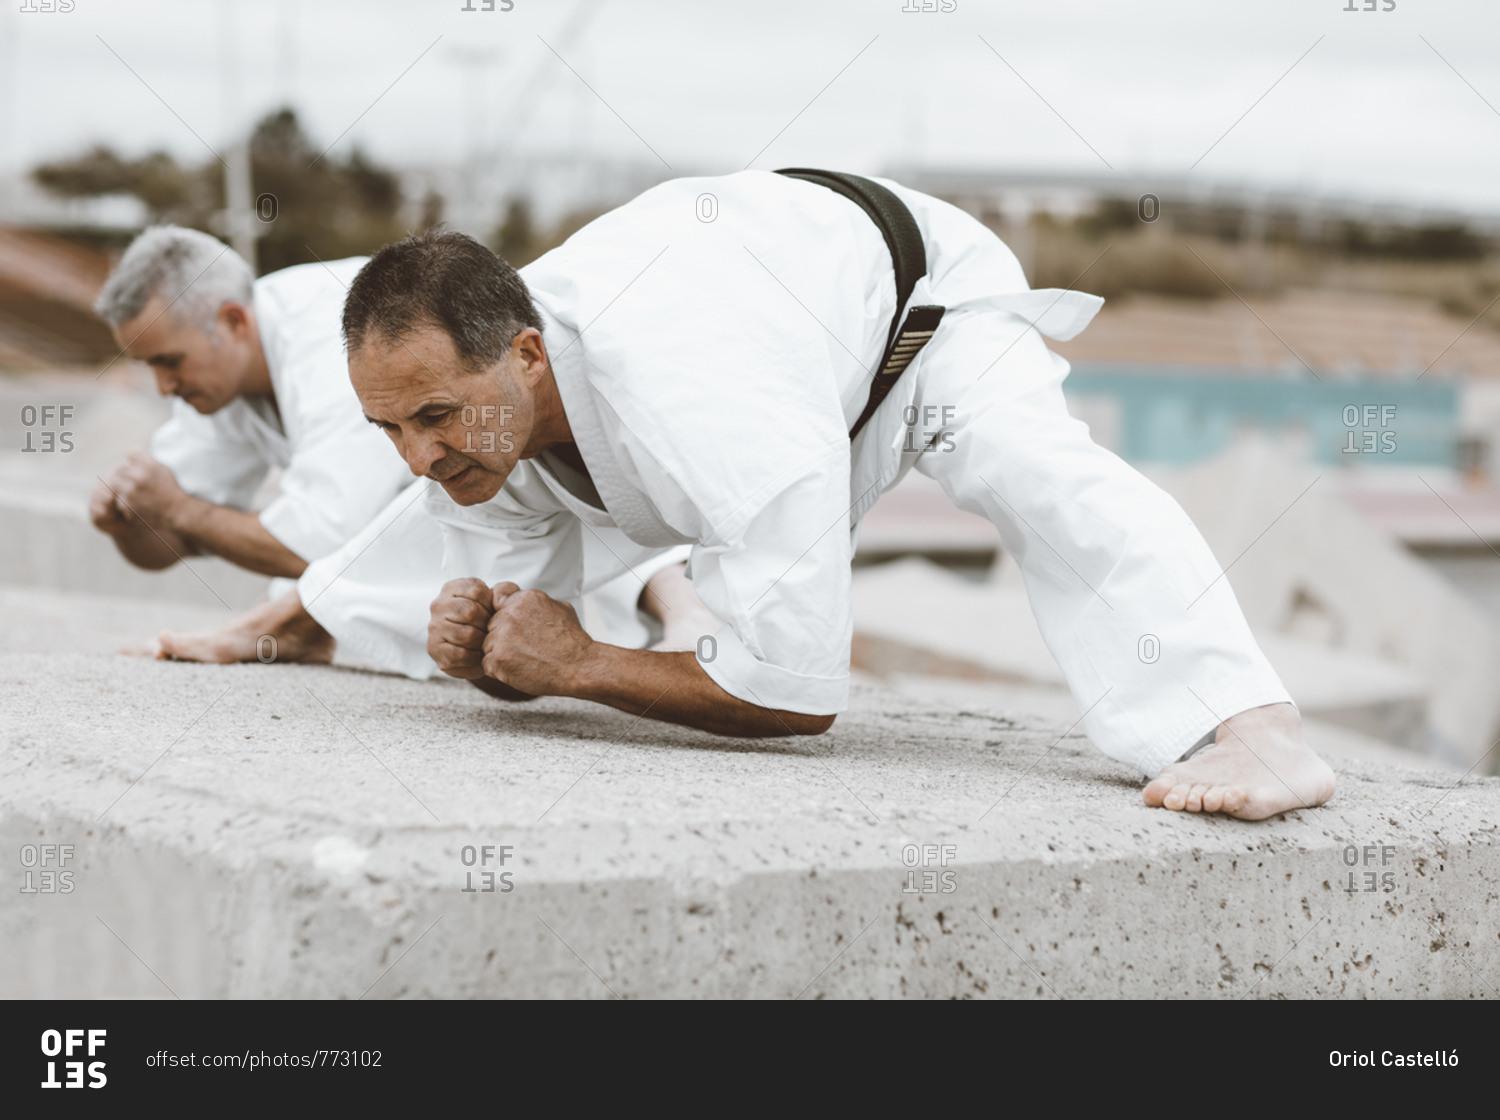 Karate fighters practicing martial art stretches